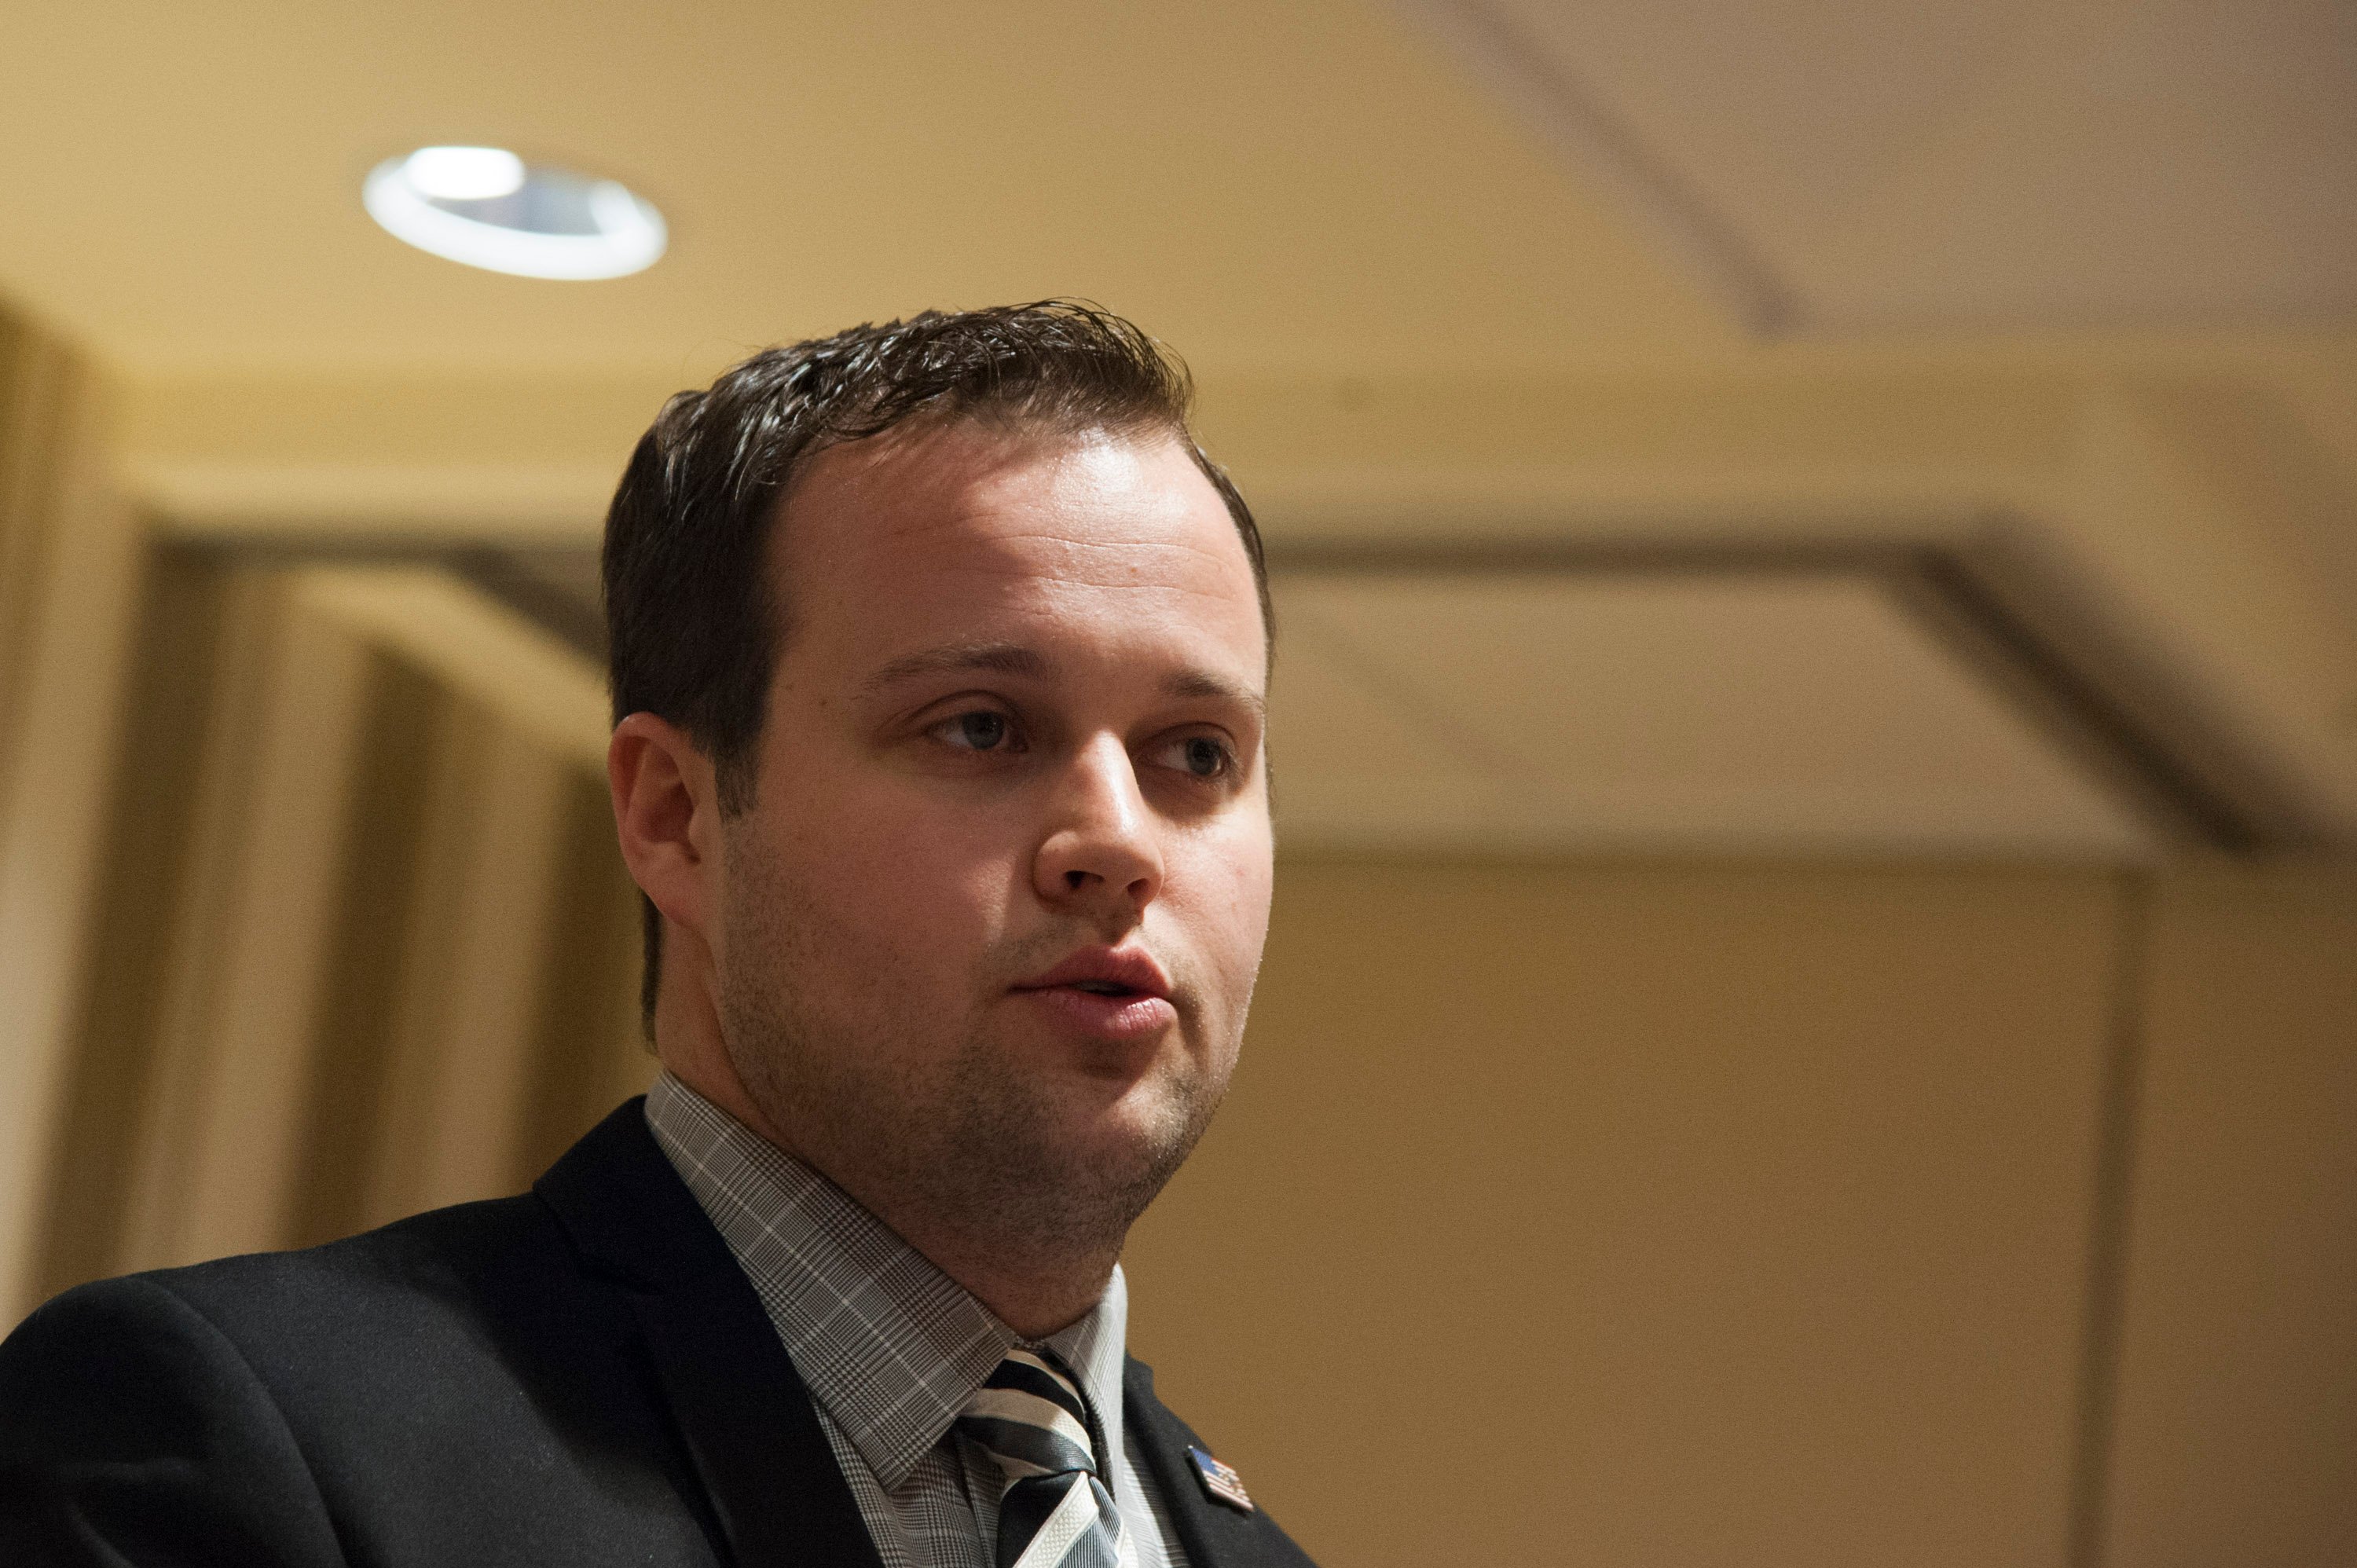 Josh Duggar speaks at the Conservative Political Action Conference in 2015